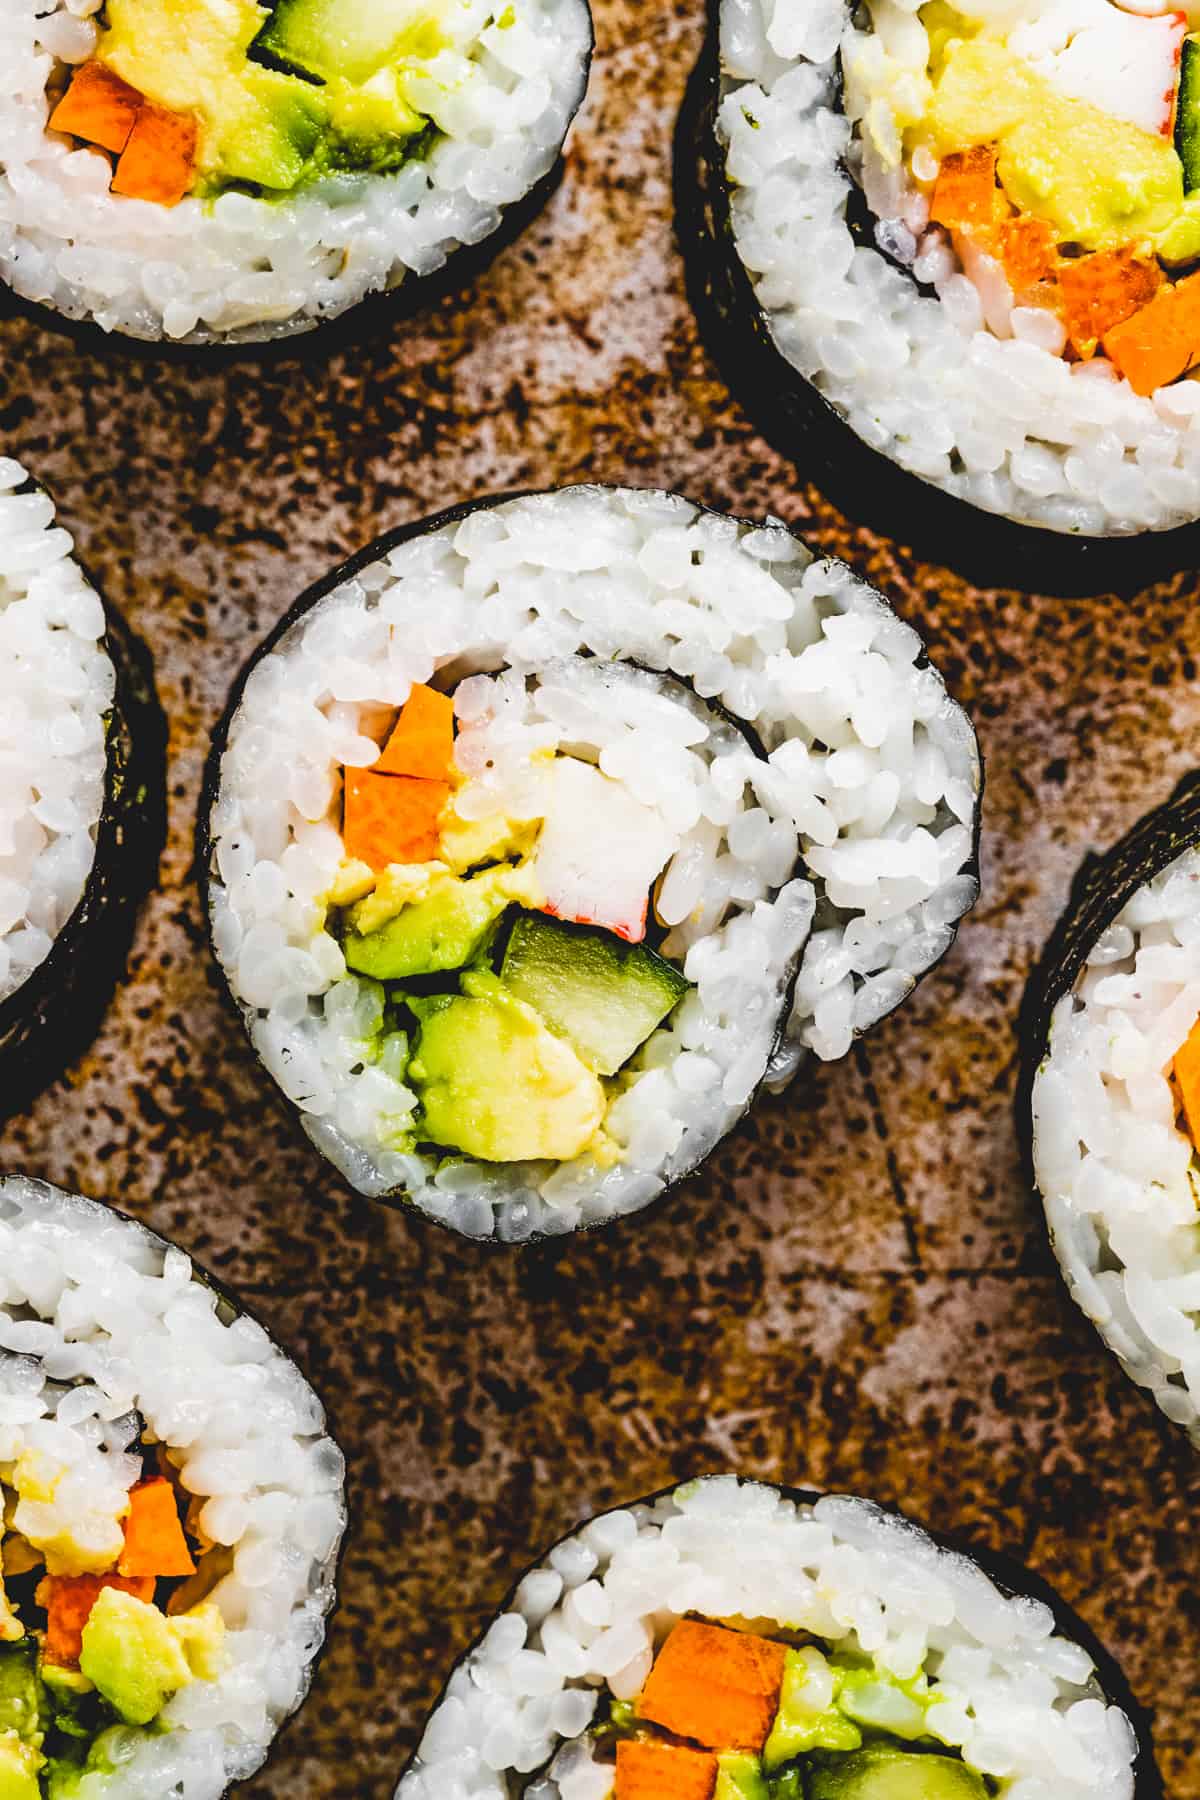 Overhead shot of several maki roll slices arranged on a brown colored backdrop.